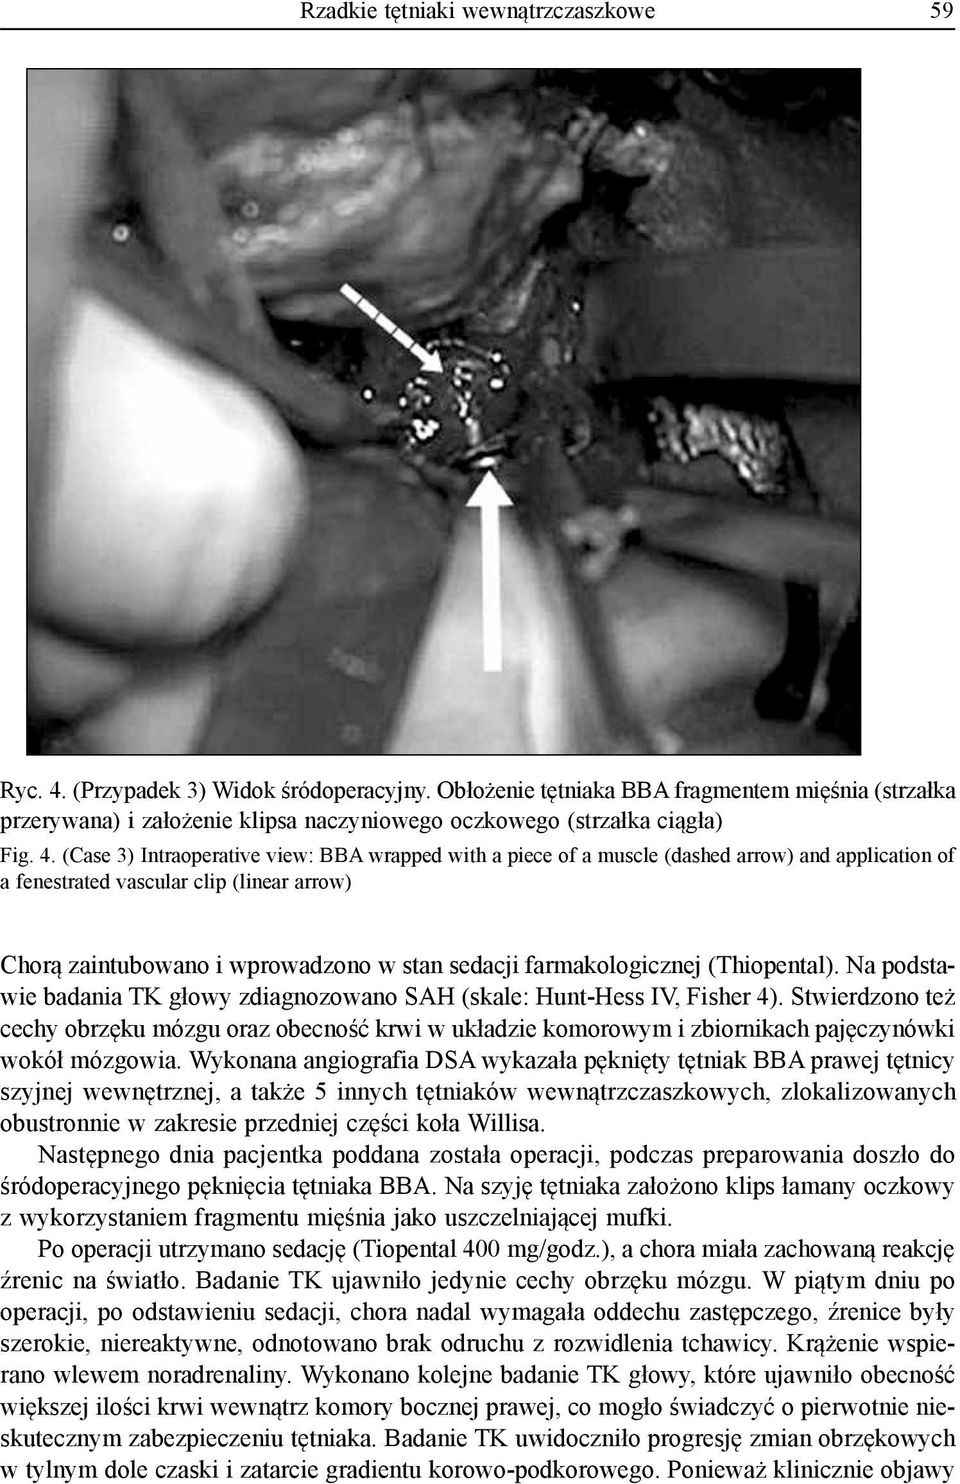 (Case 3) Intraoperative view: BBA wrapped with a piece of a muscle (dashed arrow) and application of a fenestrated vascular clip (linear arrow) Chorą zaintubowa i wprowadzo w stan sedacji